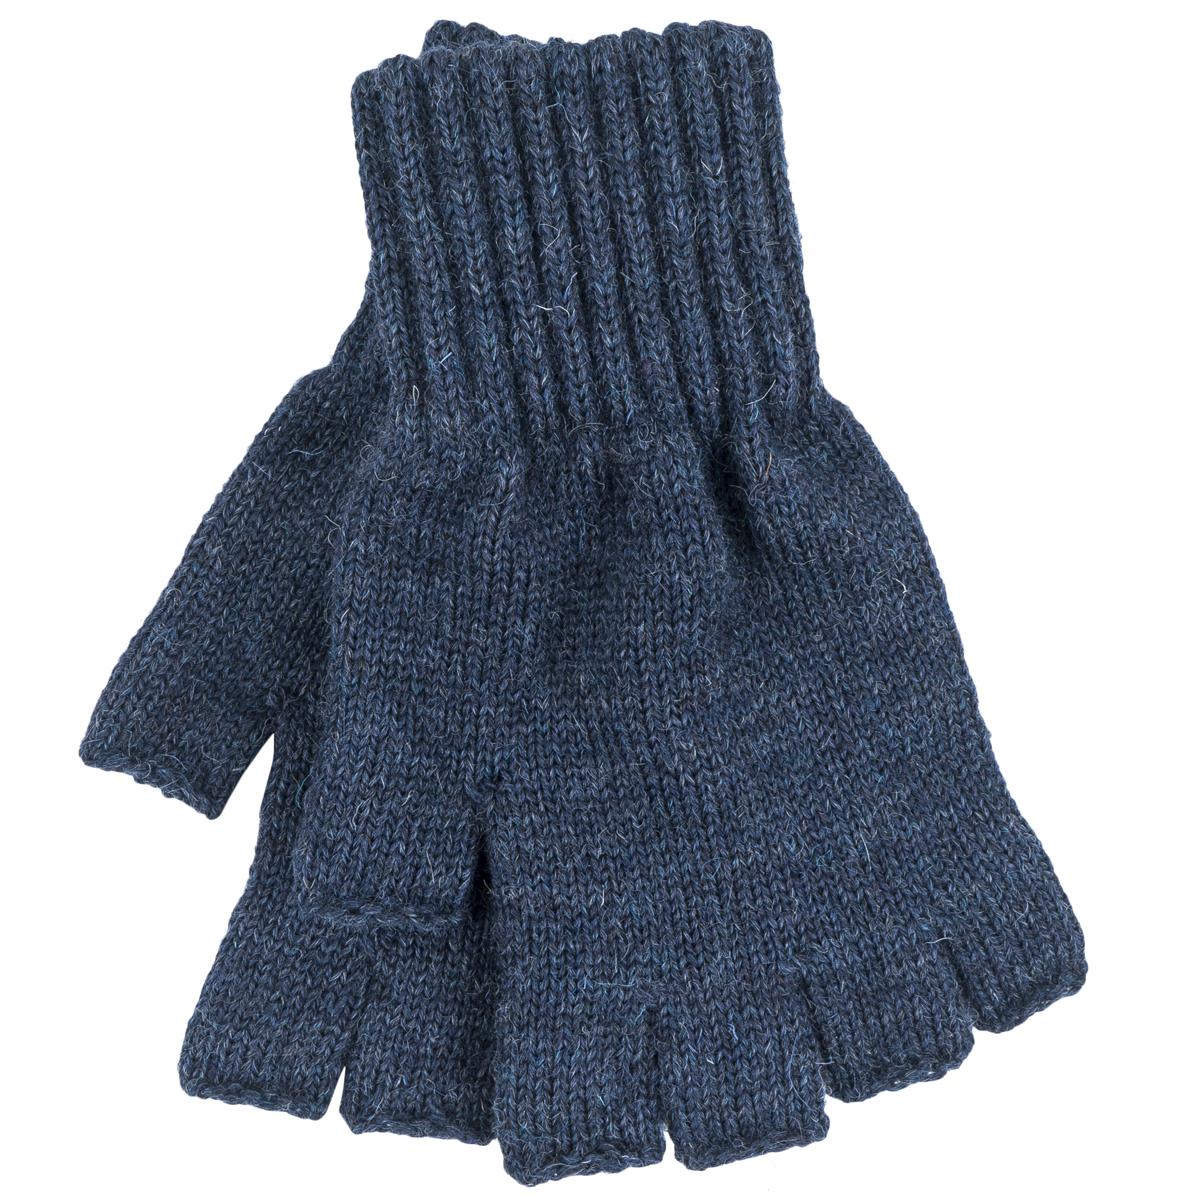 What is guaranteed by the seamless design of Barbour fingerless gloves?